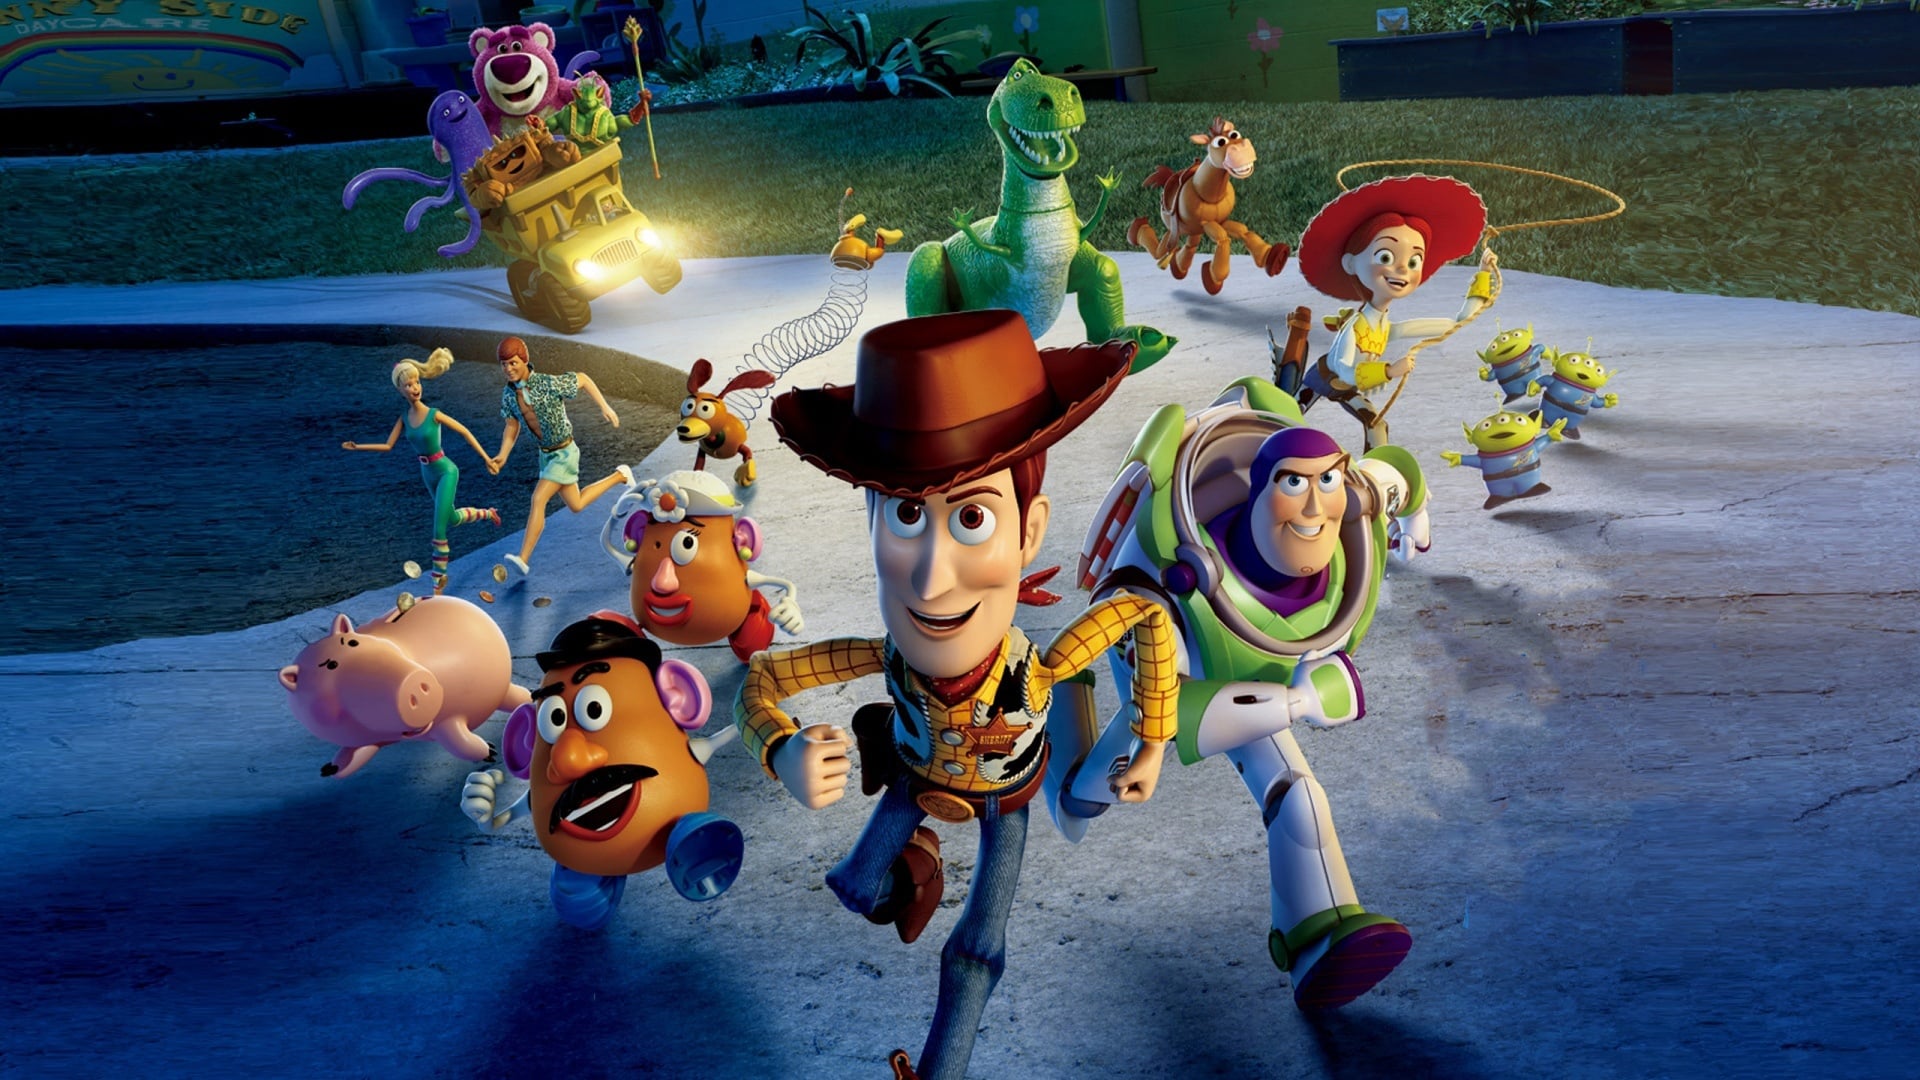 Toy Story 3 (2010)